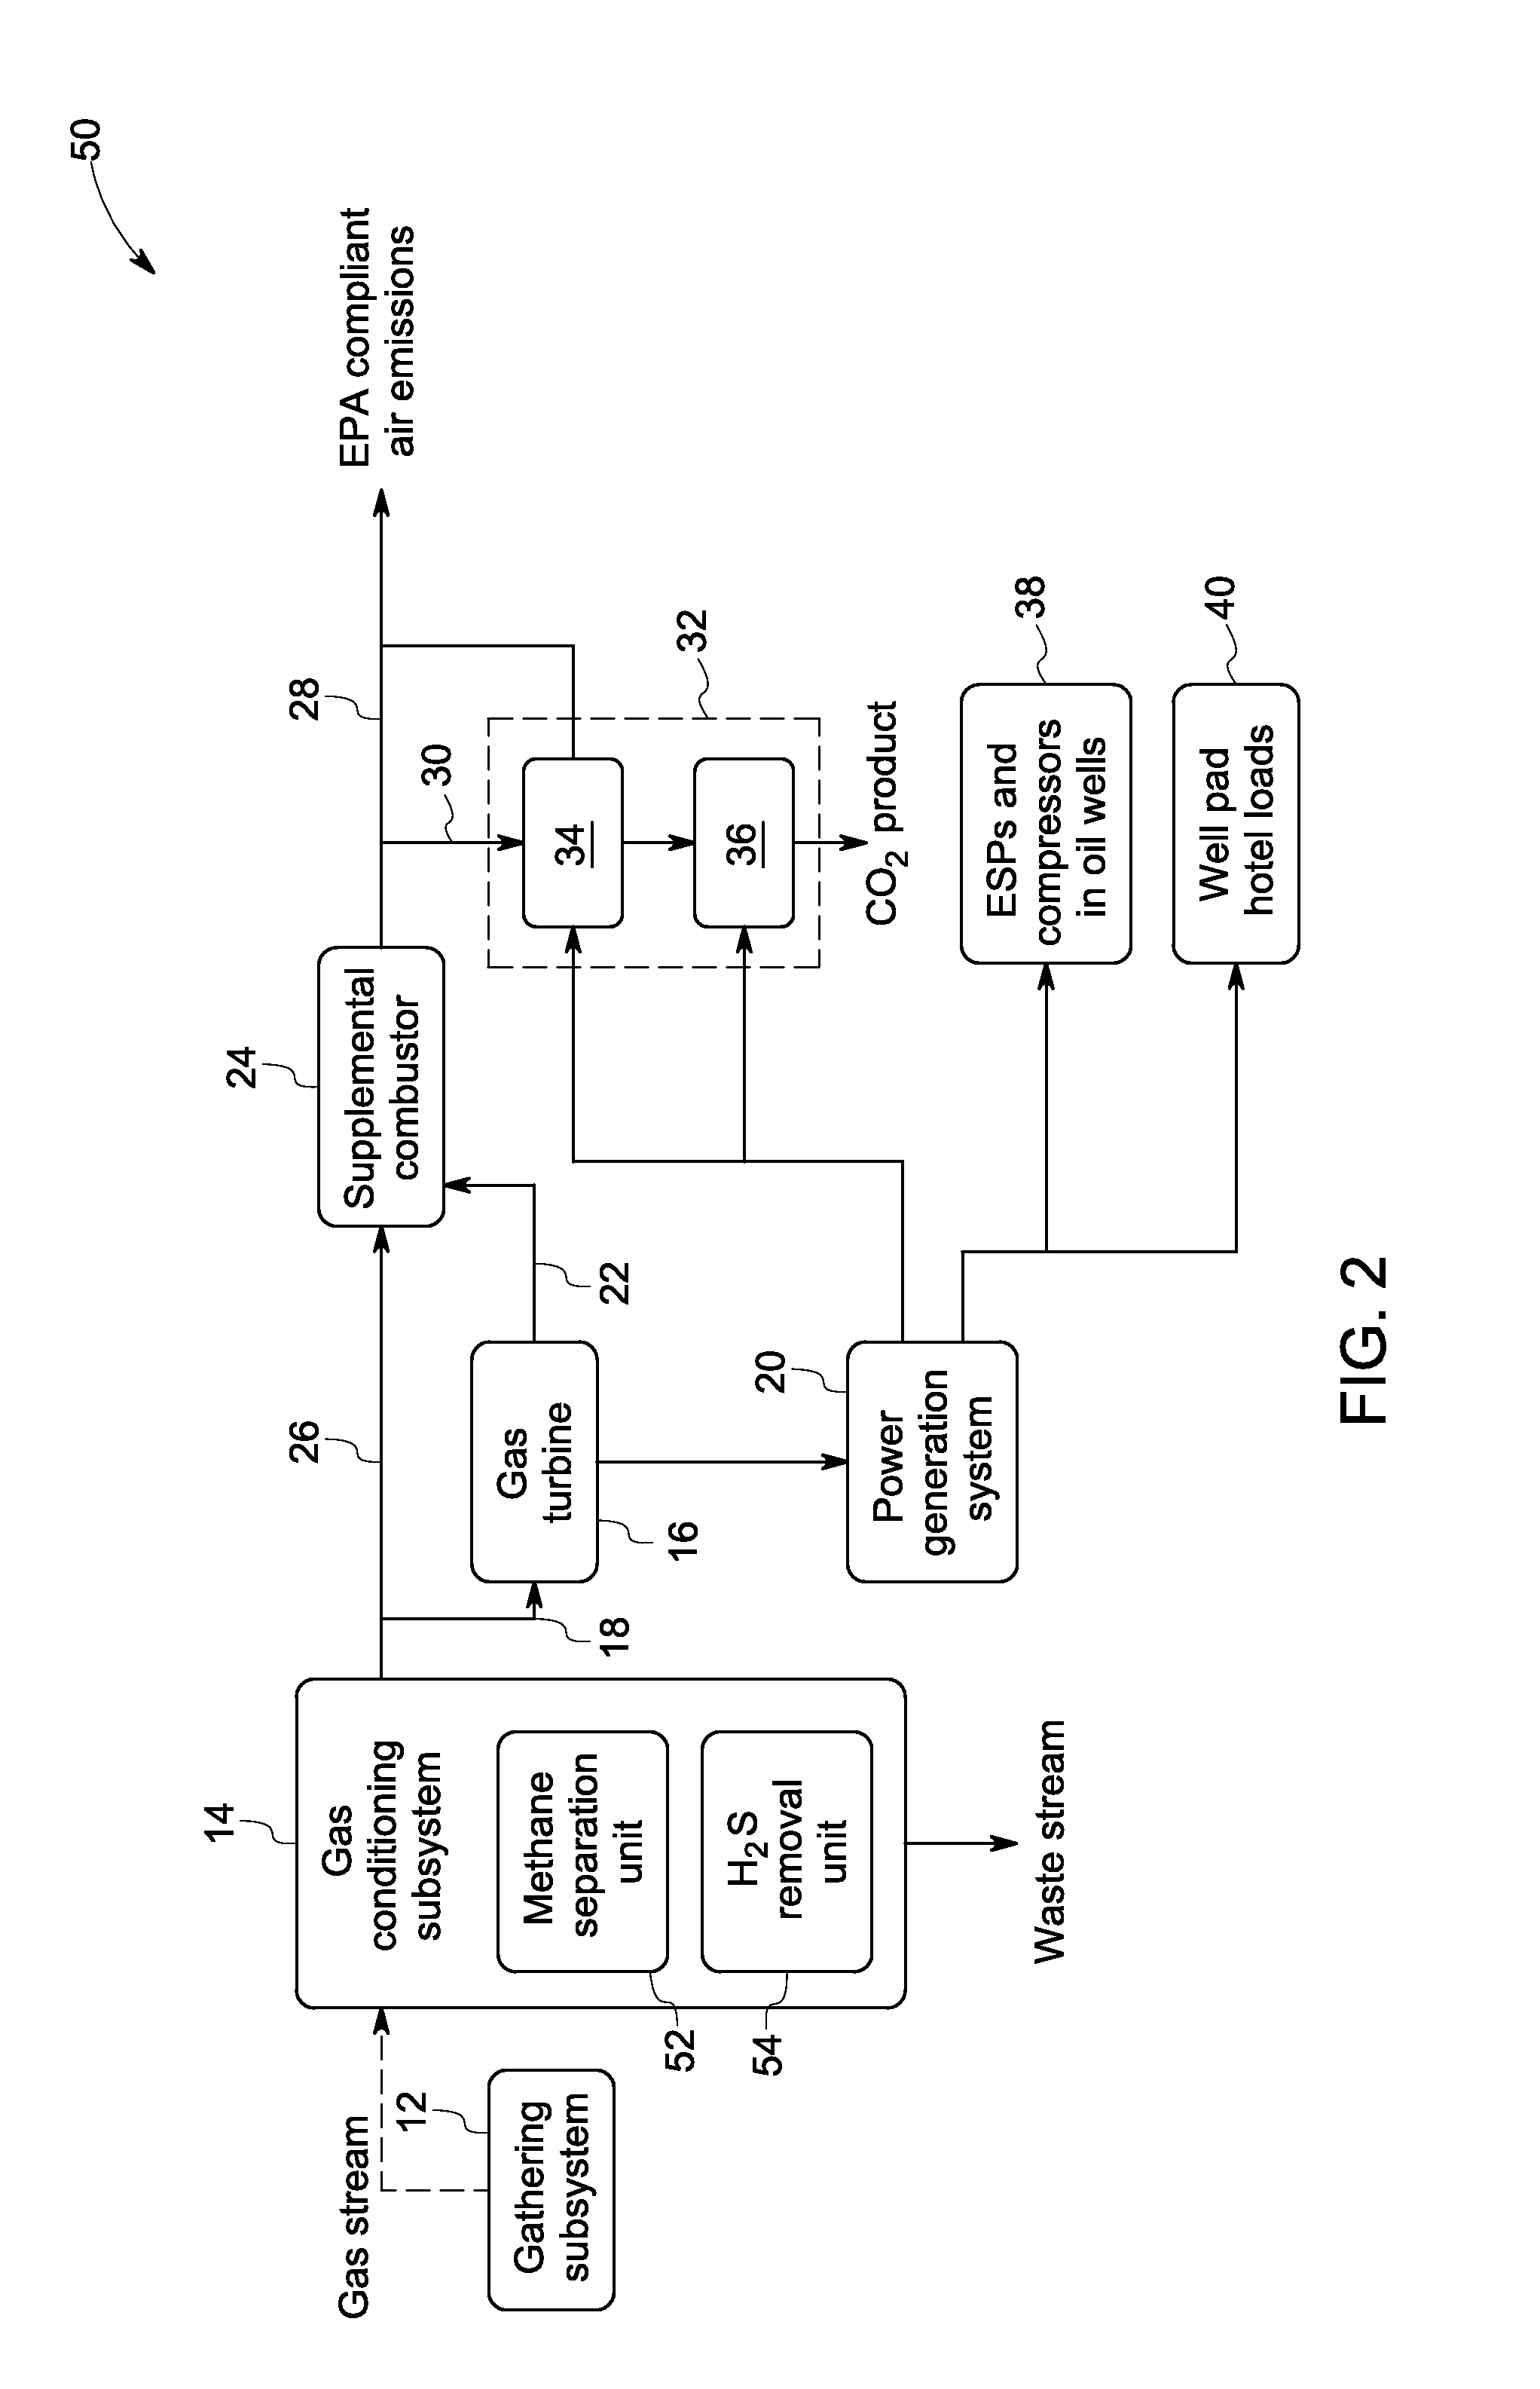 System and method for processing gas streams